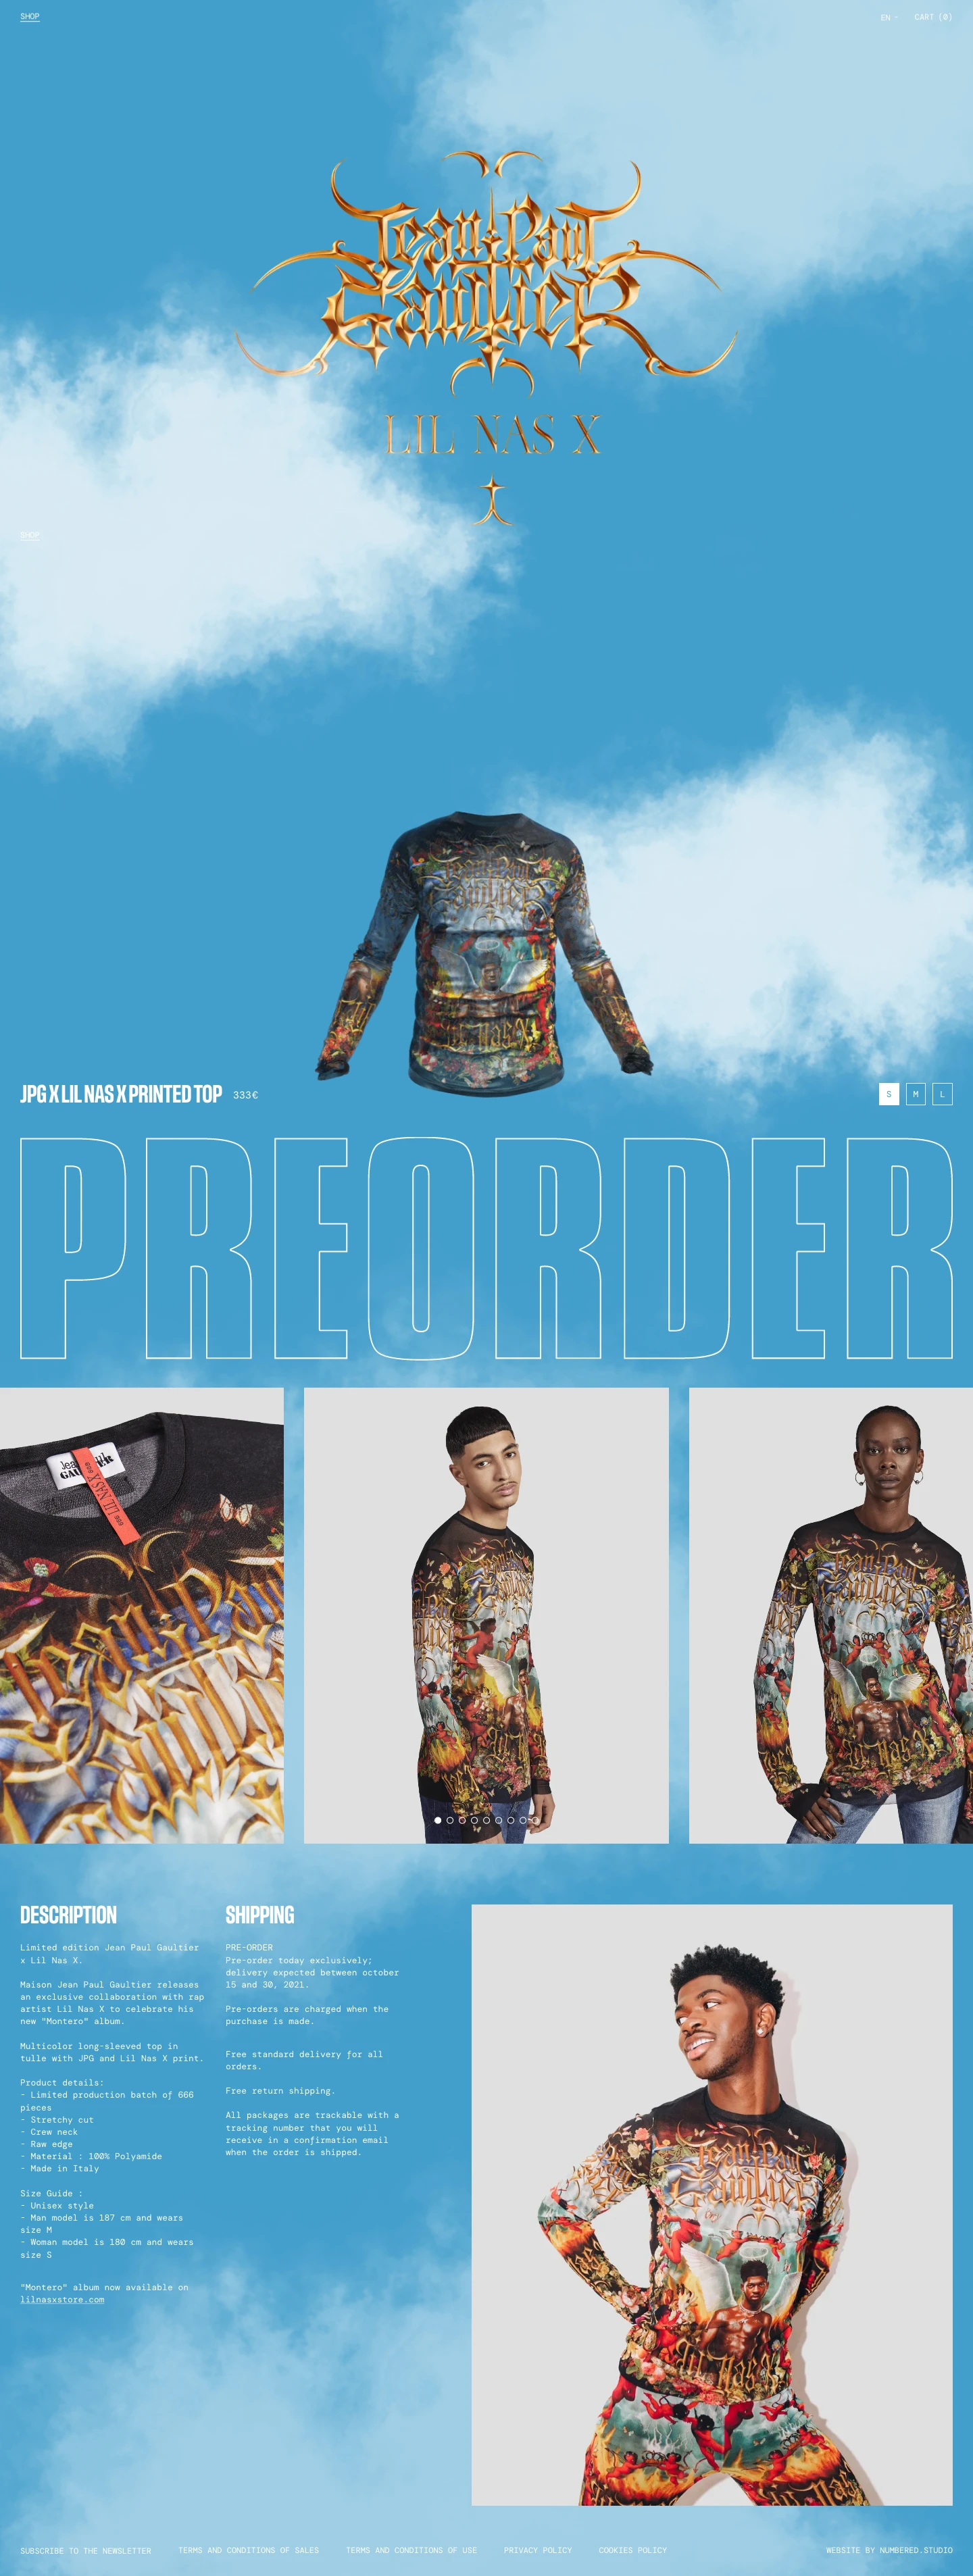 Jean Paul Gaultier x Lil Nas X Landing Page Example: Maison Jean Paul Gaultier releases an exclusive collaboration with rap artist Lil Nas X to celebrate his new "Montero" album.